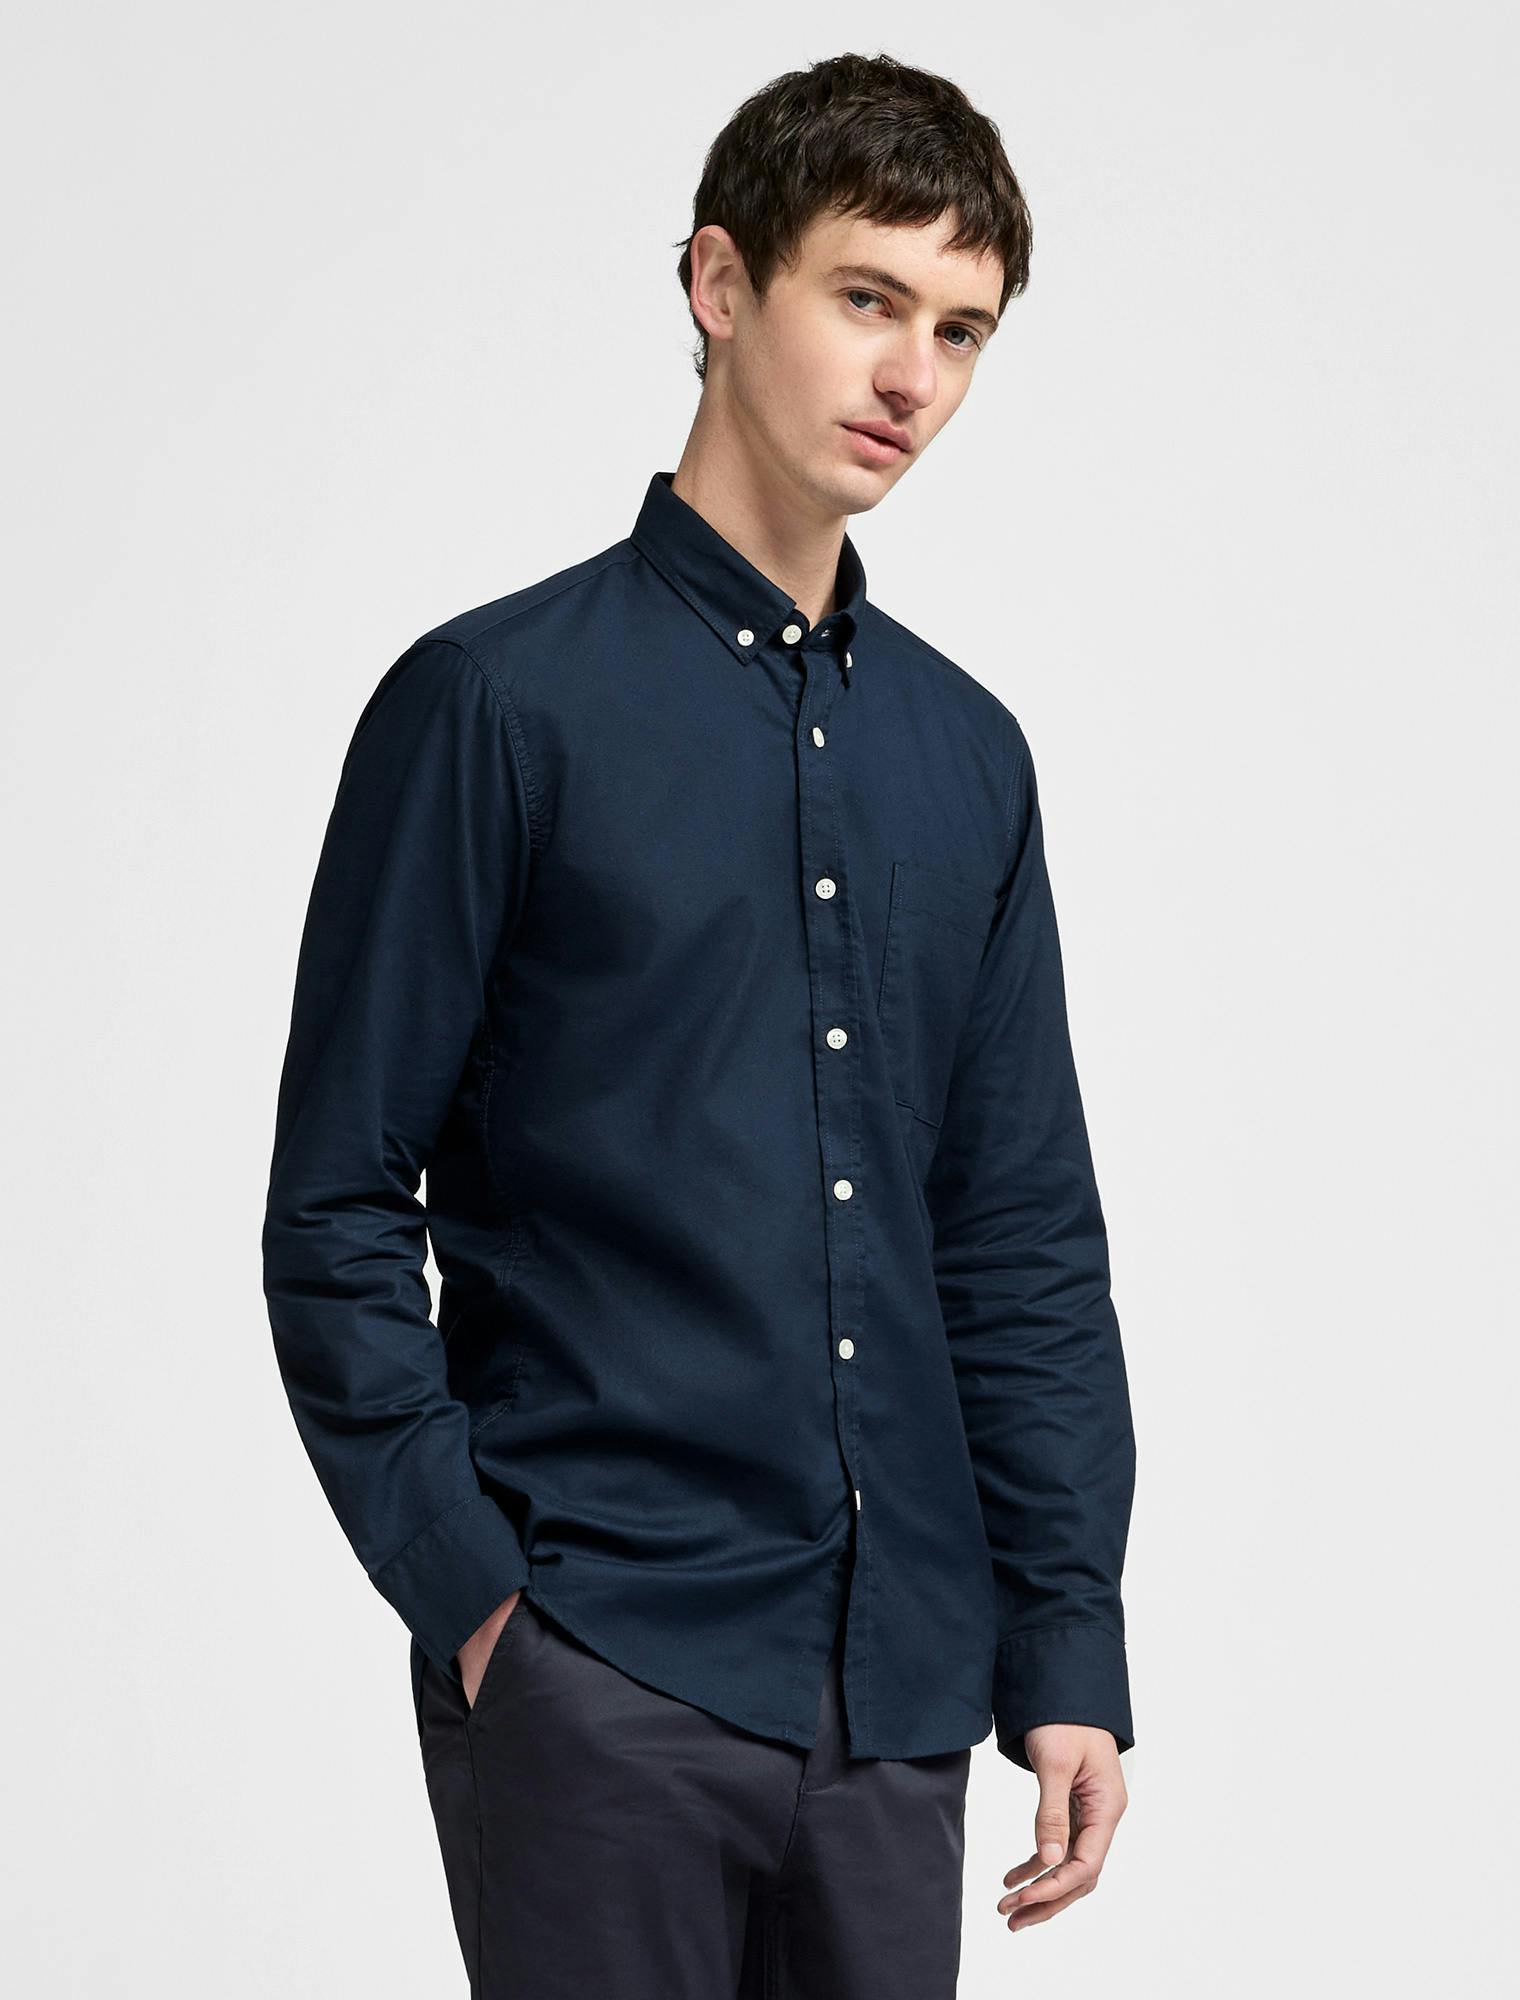 Men's Smith Long Sleeve Oxford Shirt - Navy Blue with White Buttons